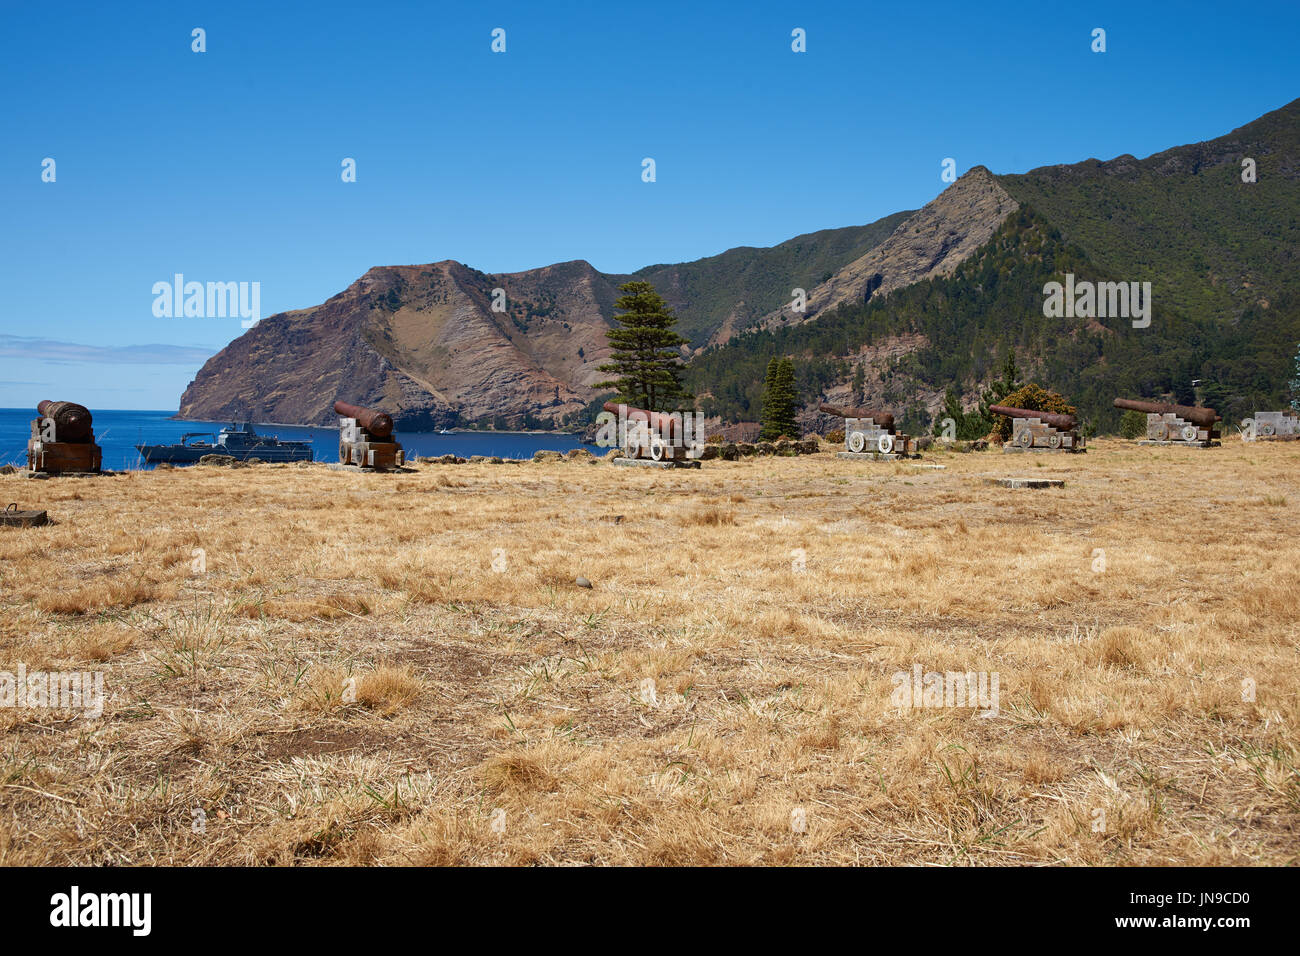 Historic Spanish fort overlooking Cumberland Bay and the town of San Juan Bautista on Robinson Crusoe Island in the Juan Fernandez Islands, Chile Stock Photo